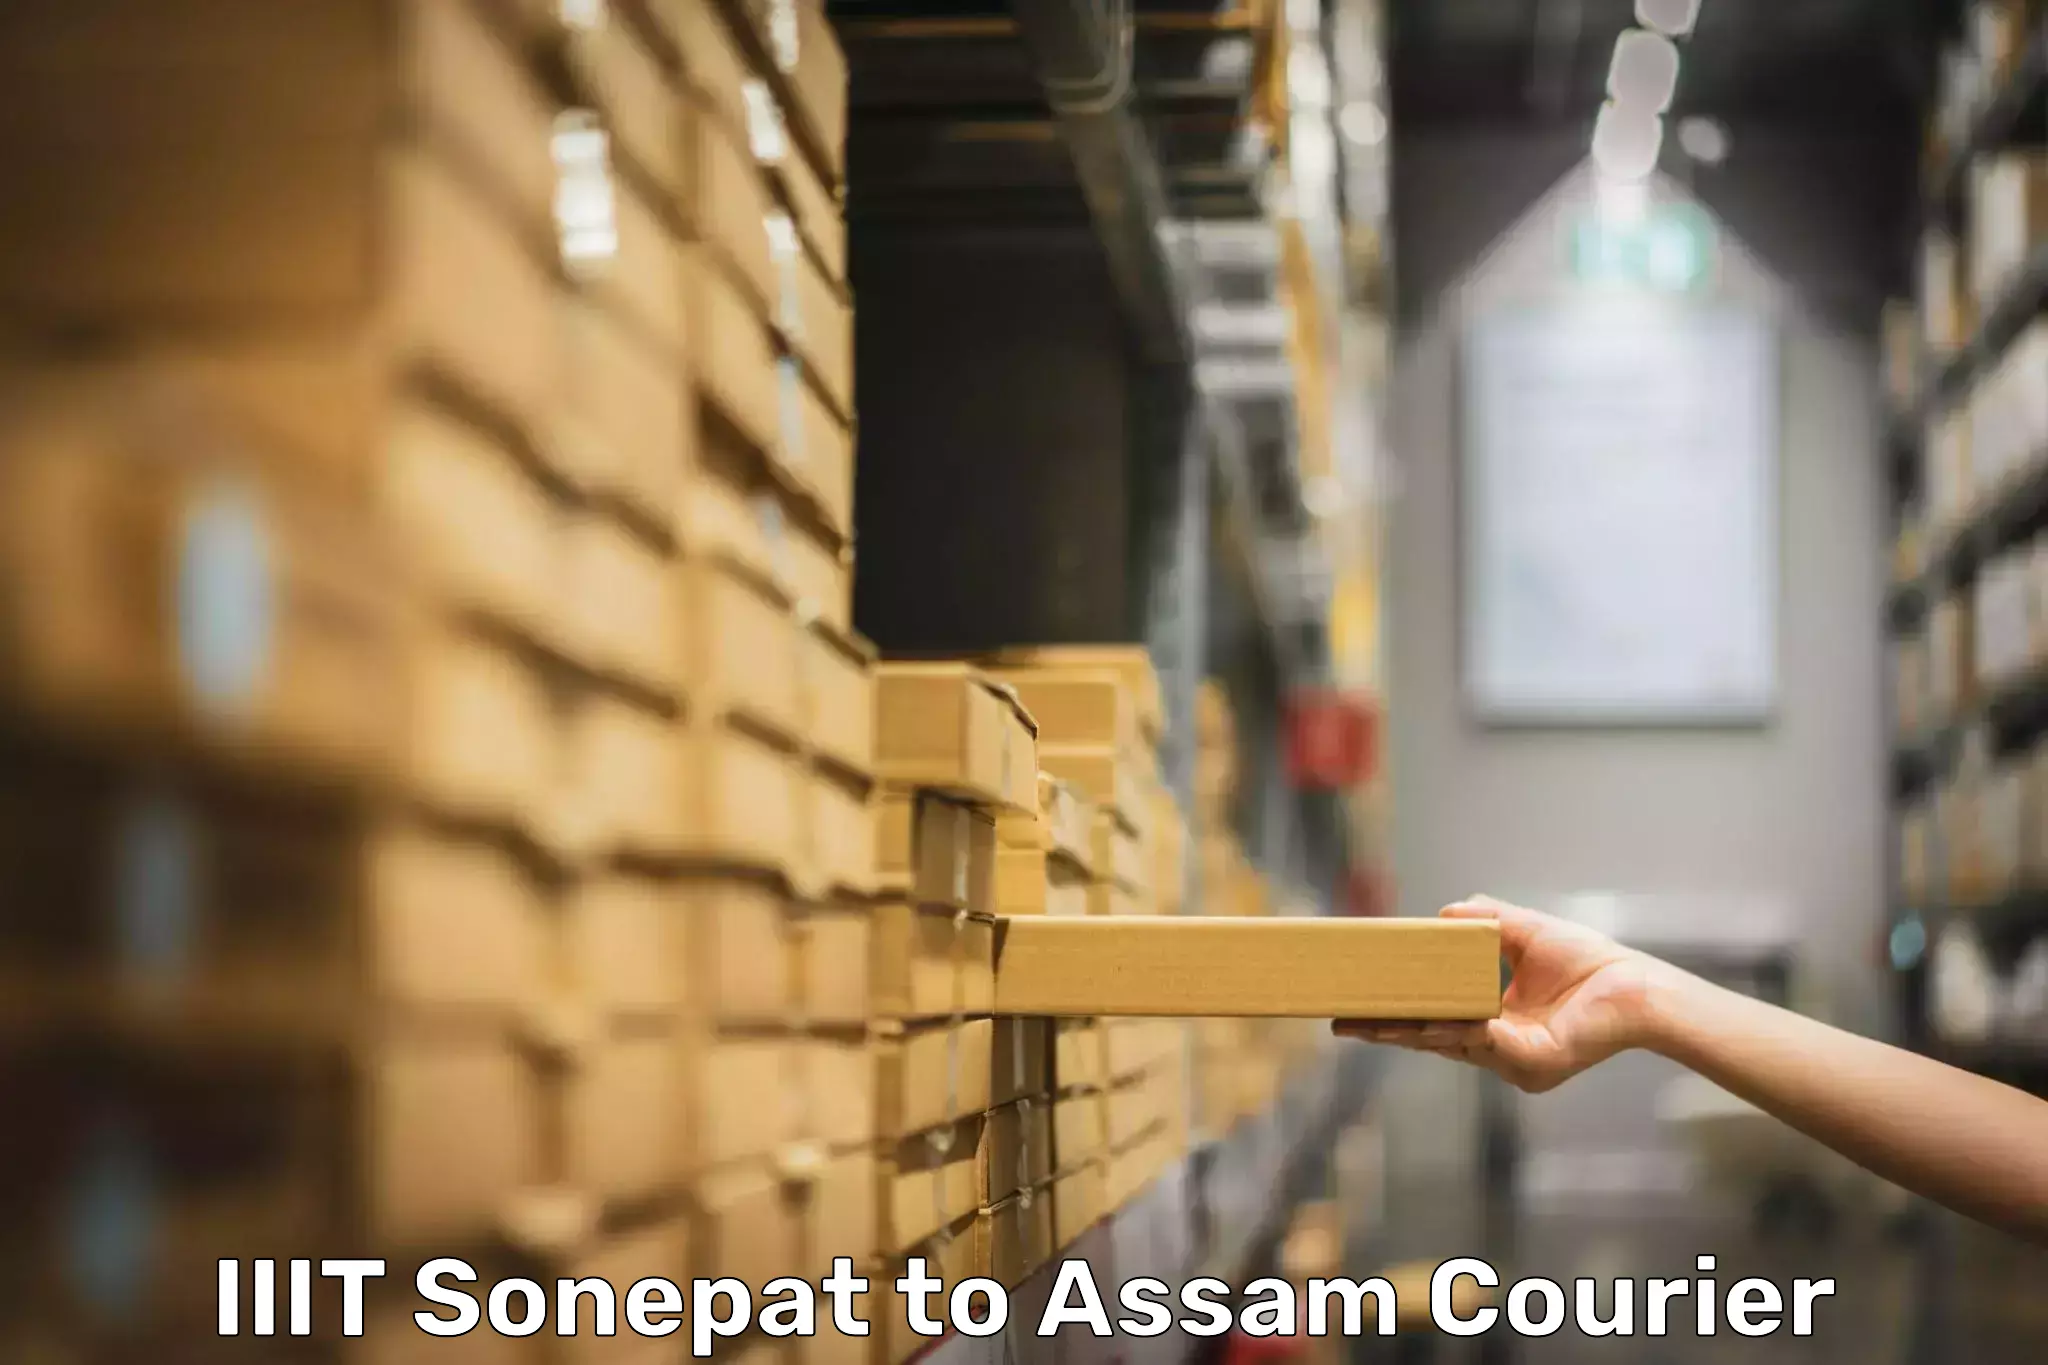 Personal effects shipping IIIT Sonepat to Assam